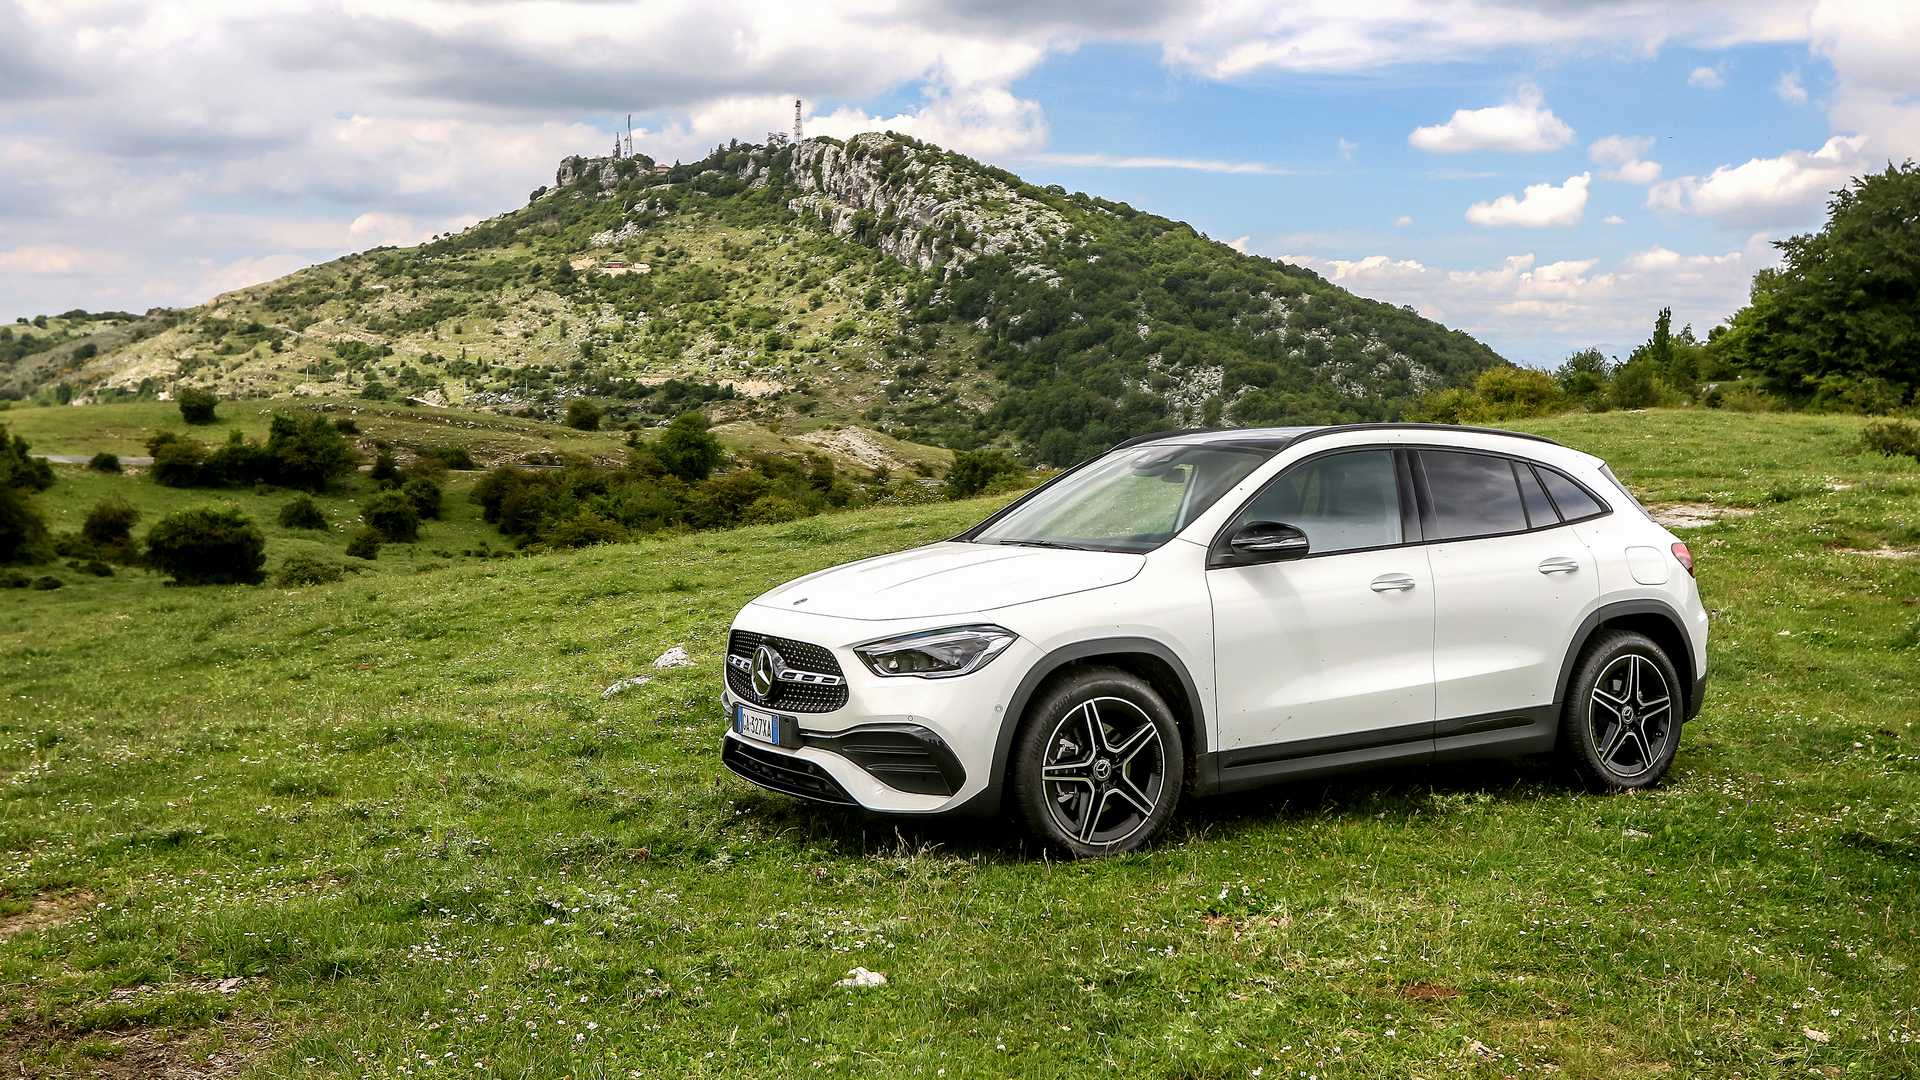 MERCEDES GLA VOTED "MOST BEAUTIFUL CAR OF THE YEAR 2021"